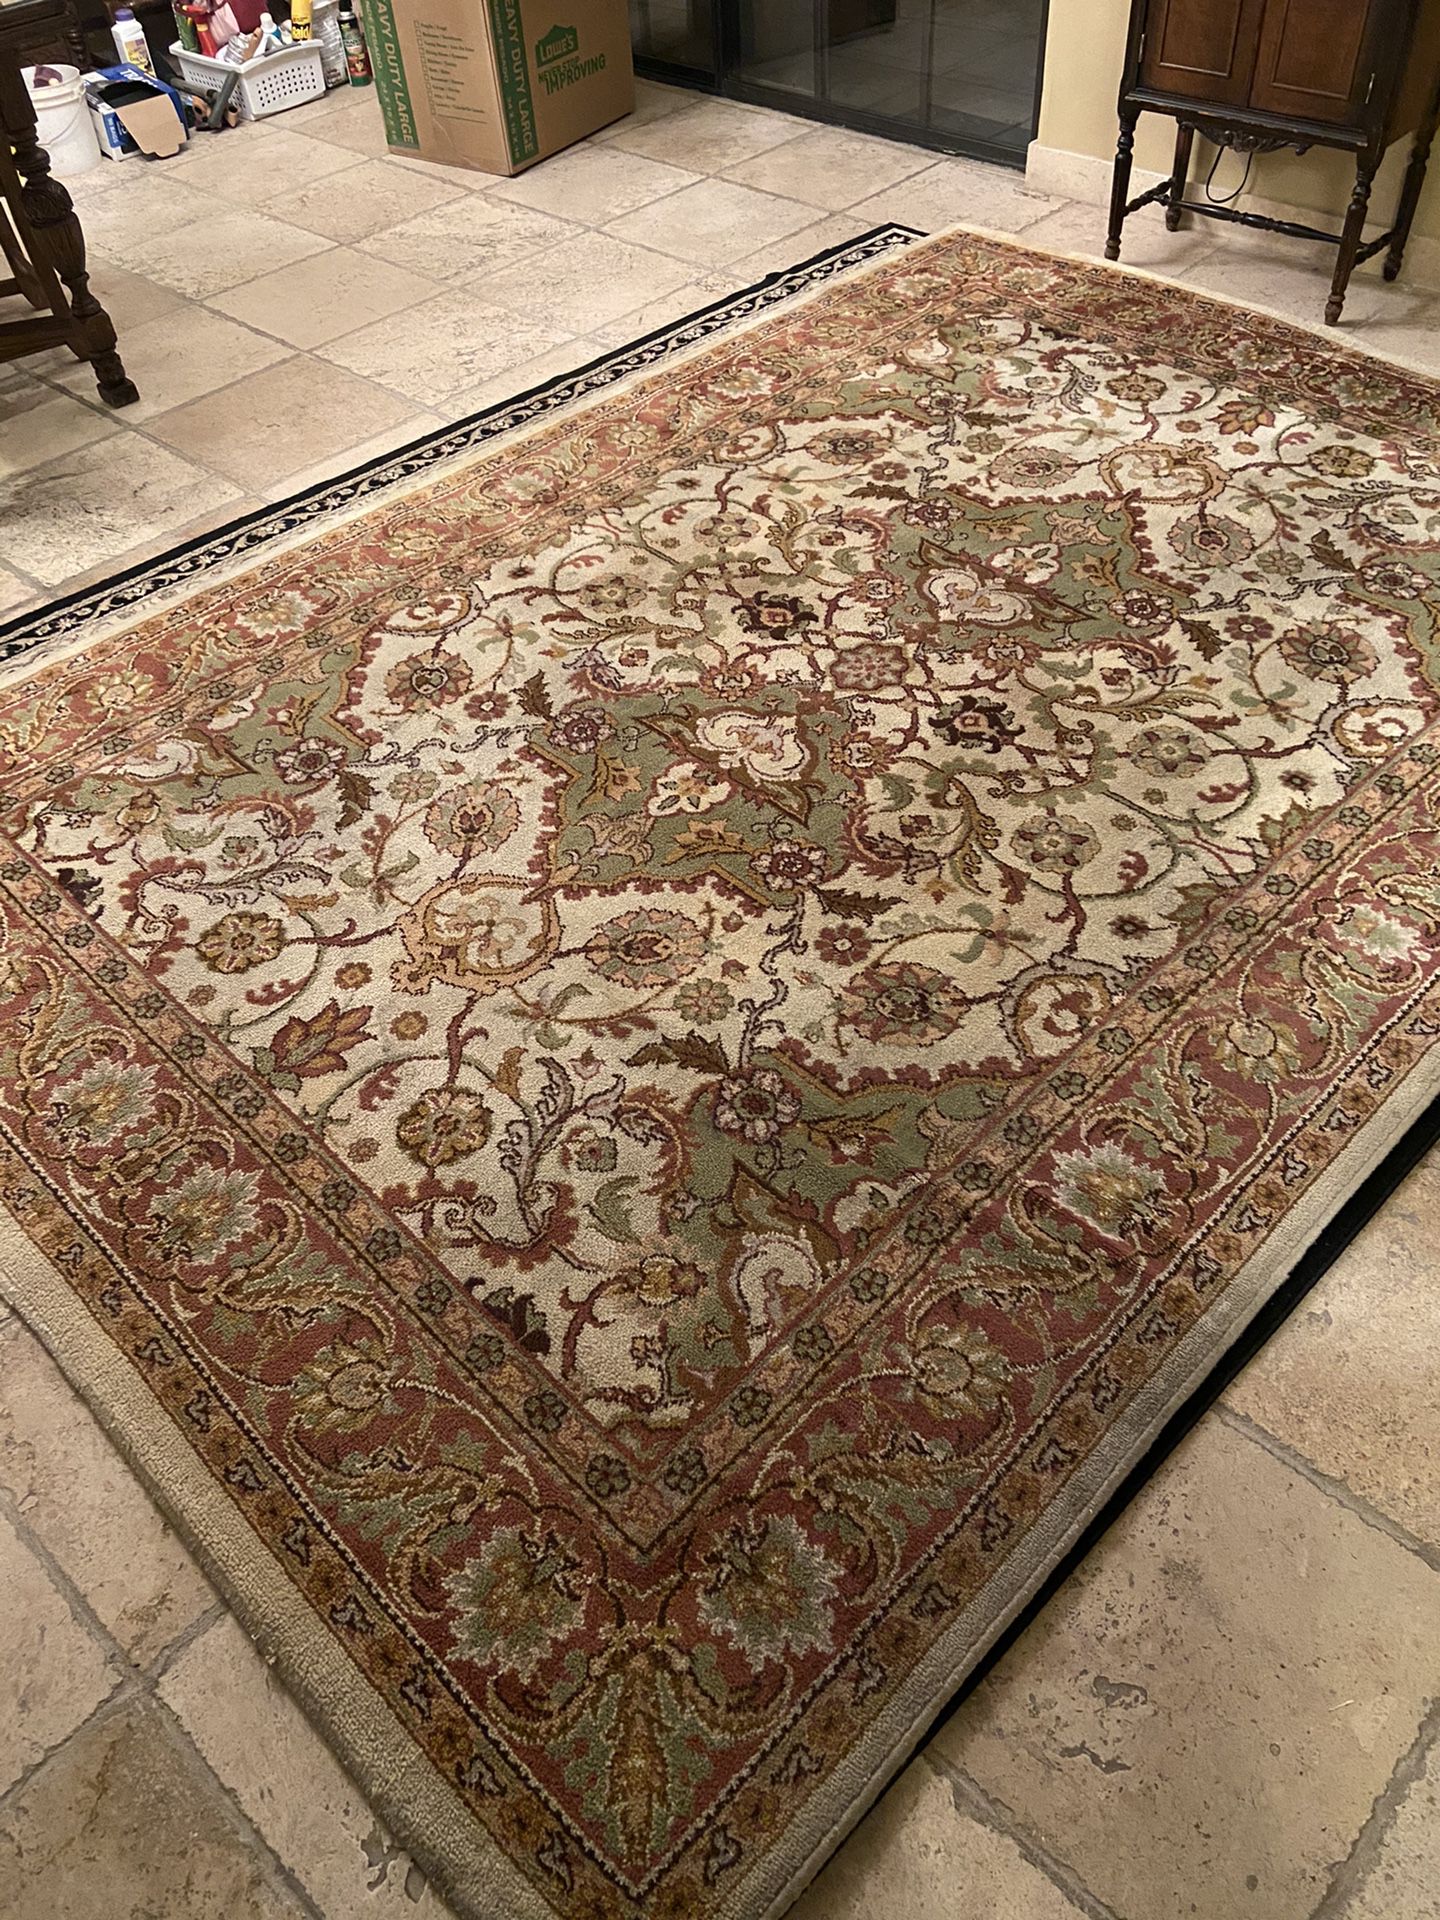 Large brown area rug 8 x 10